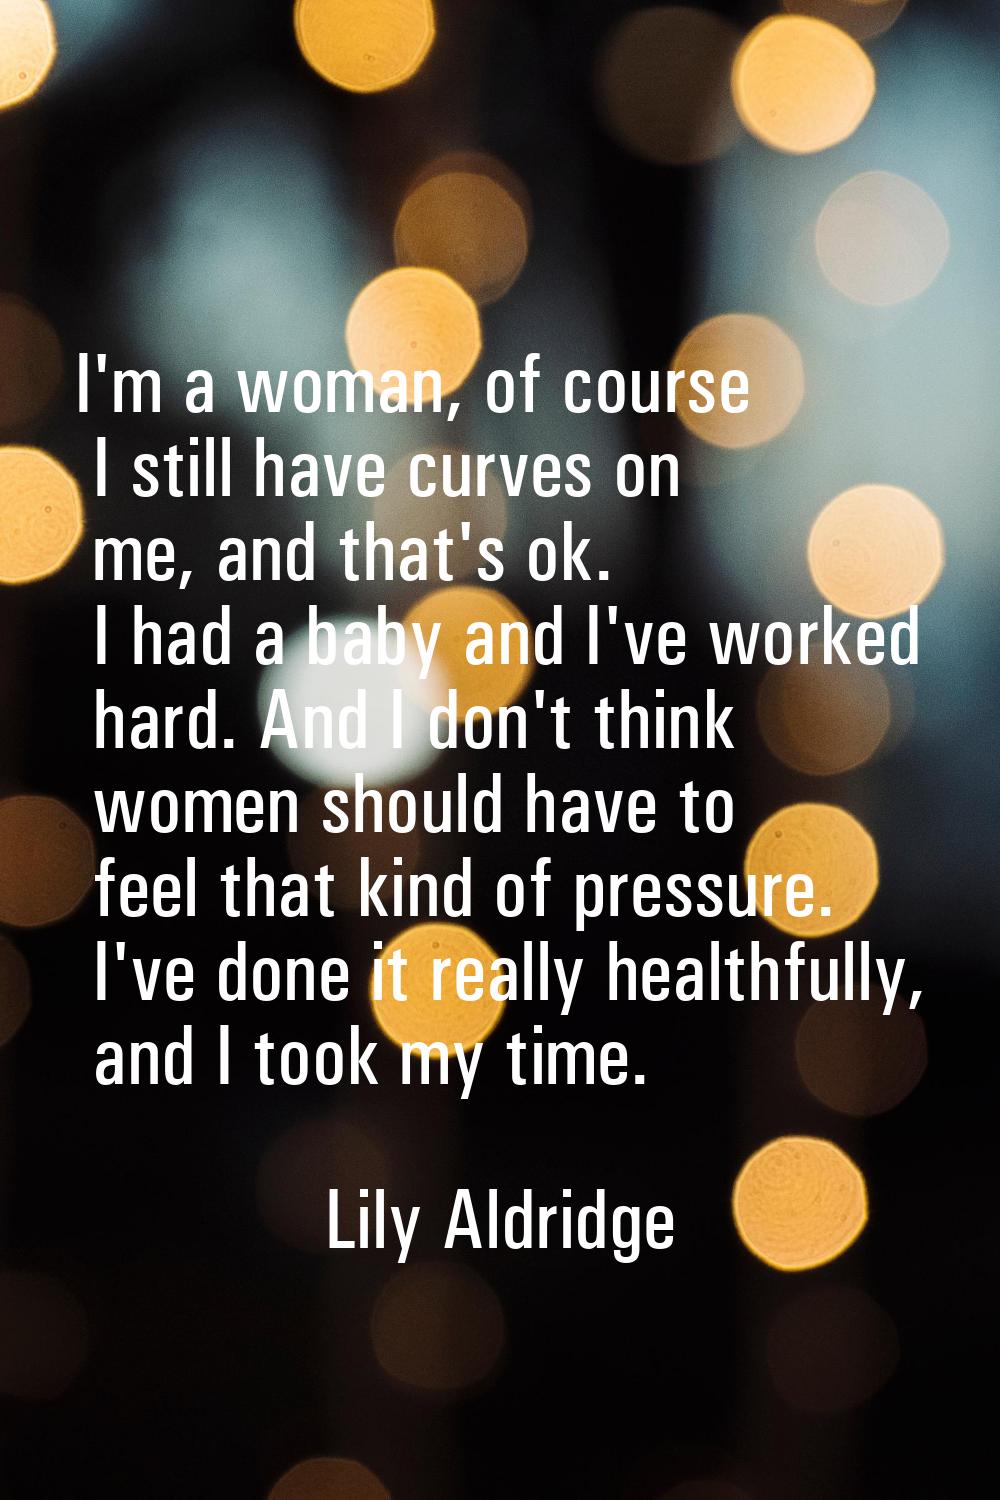 I'm a woman, of course I still have curves on me, and that's ok. I had a baby and I've worked hard.